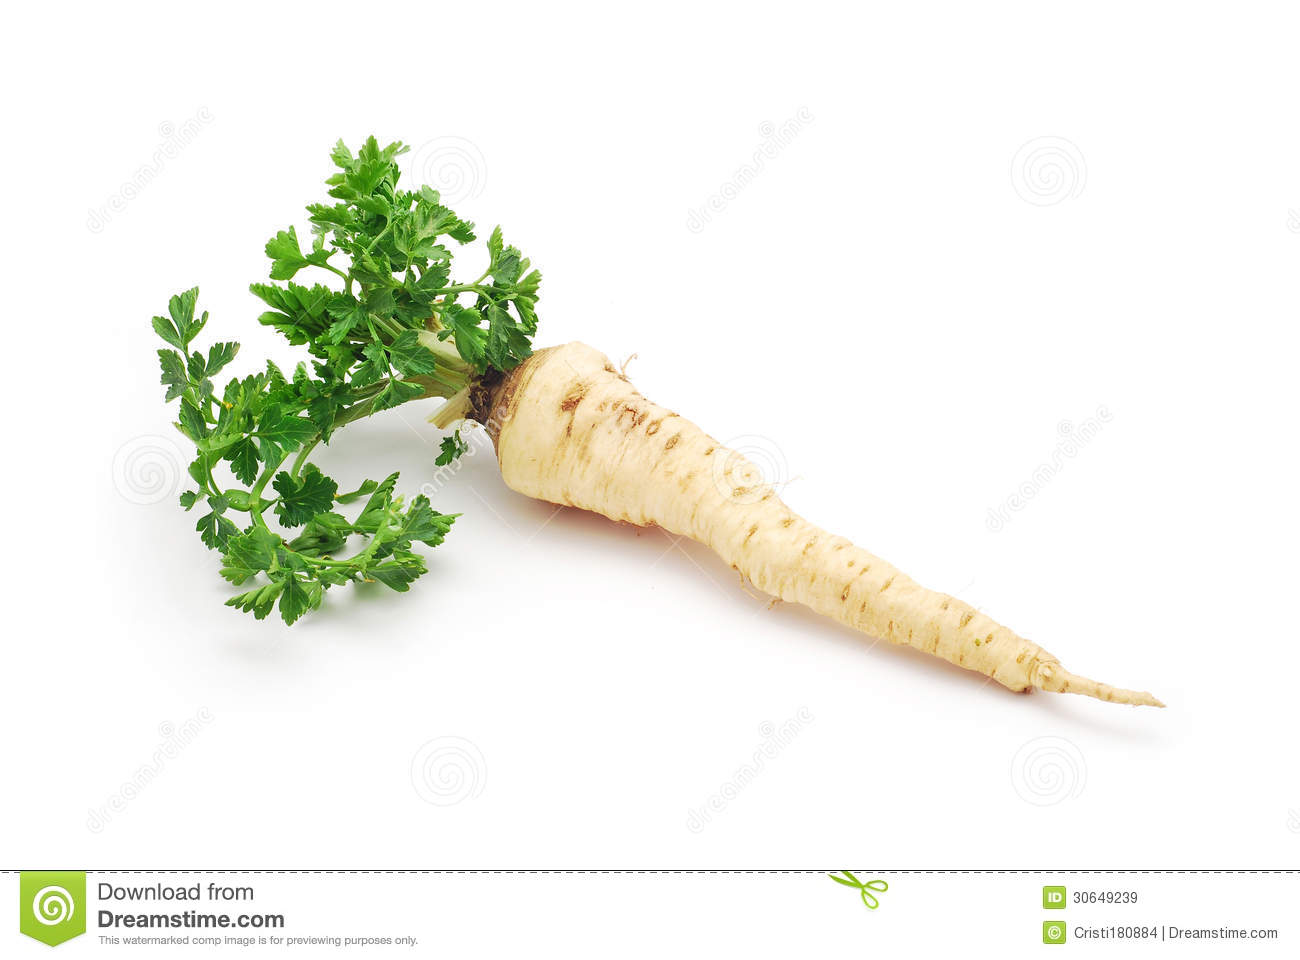 Parsley Root Stock Image.